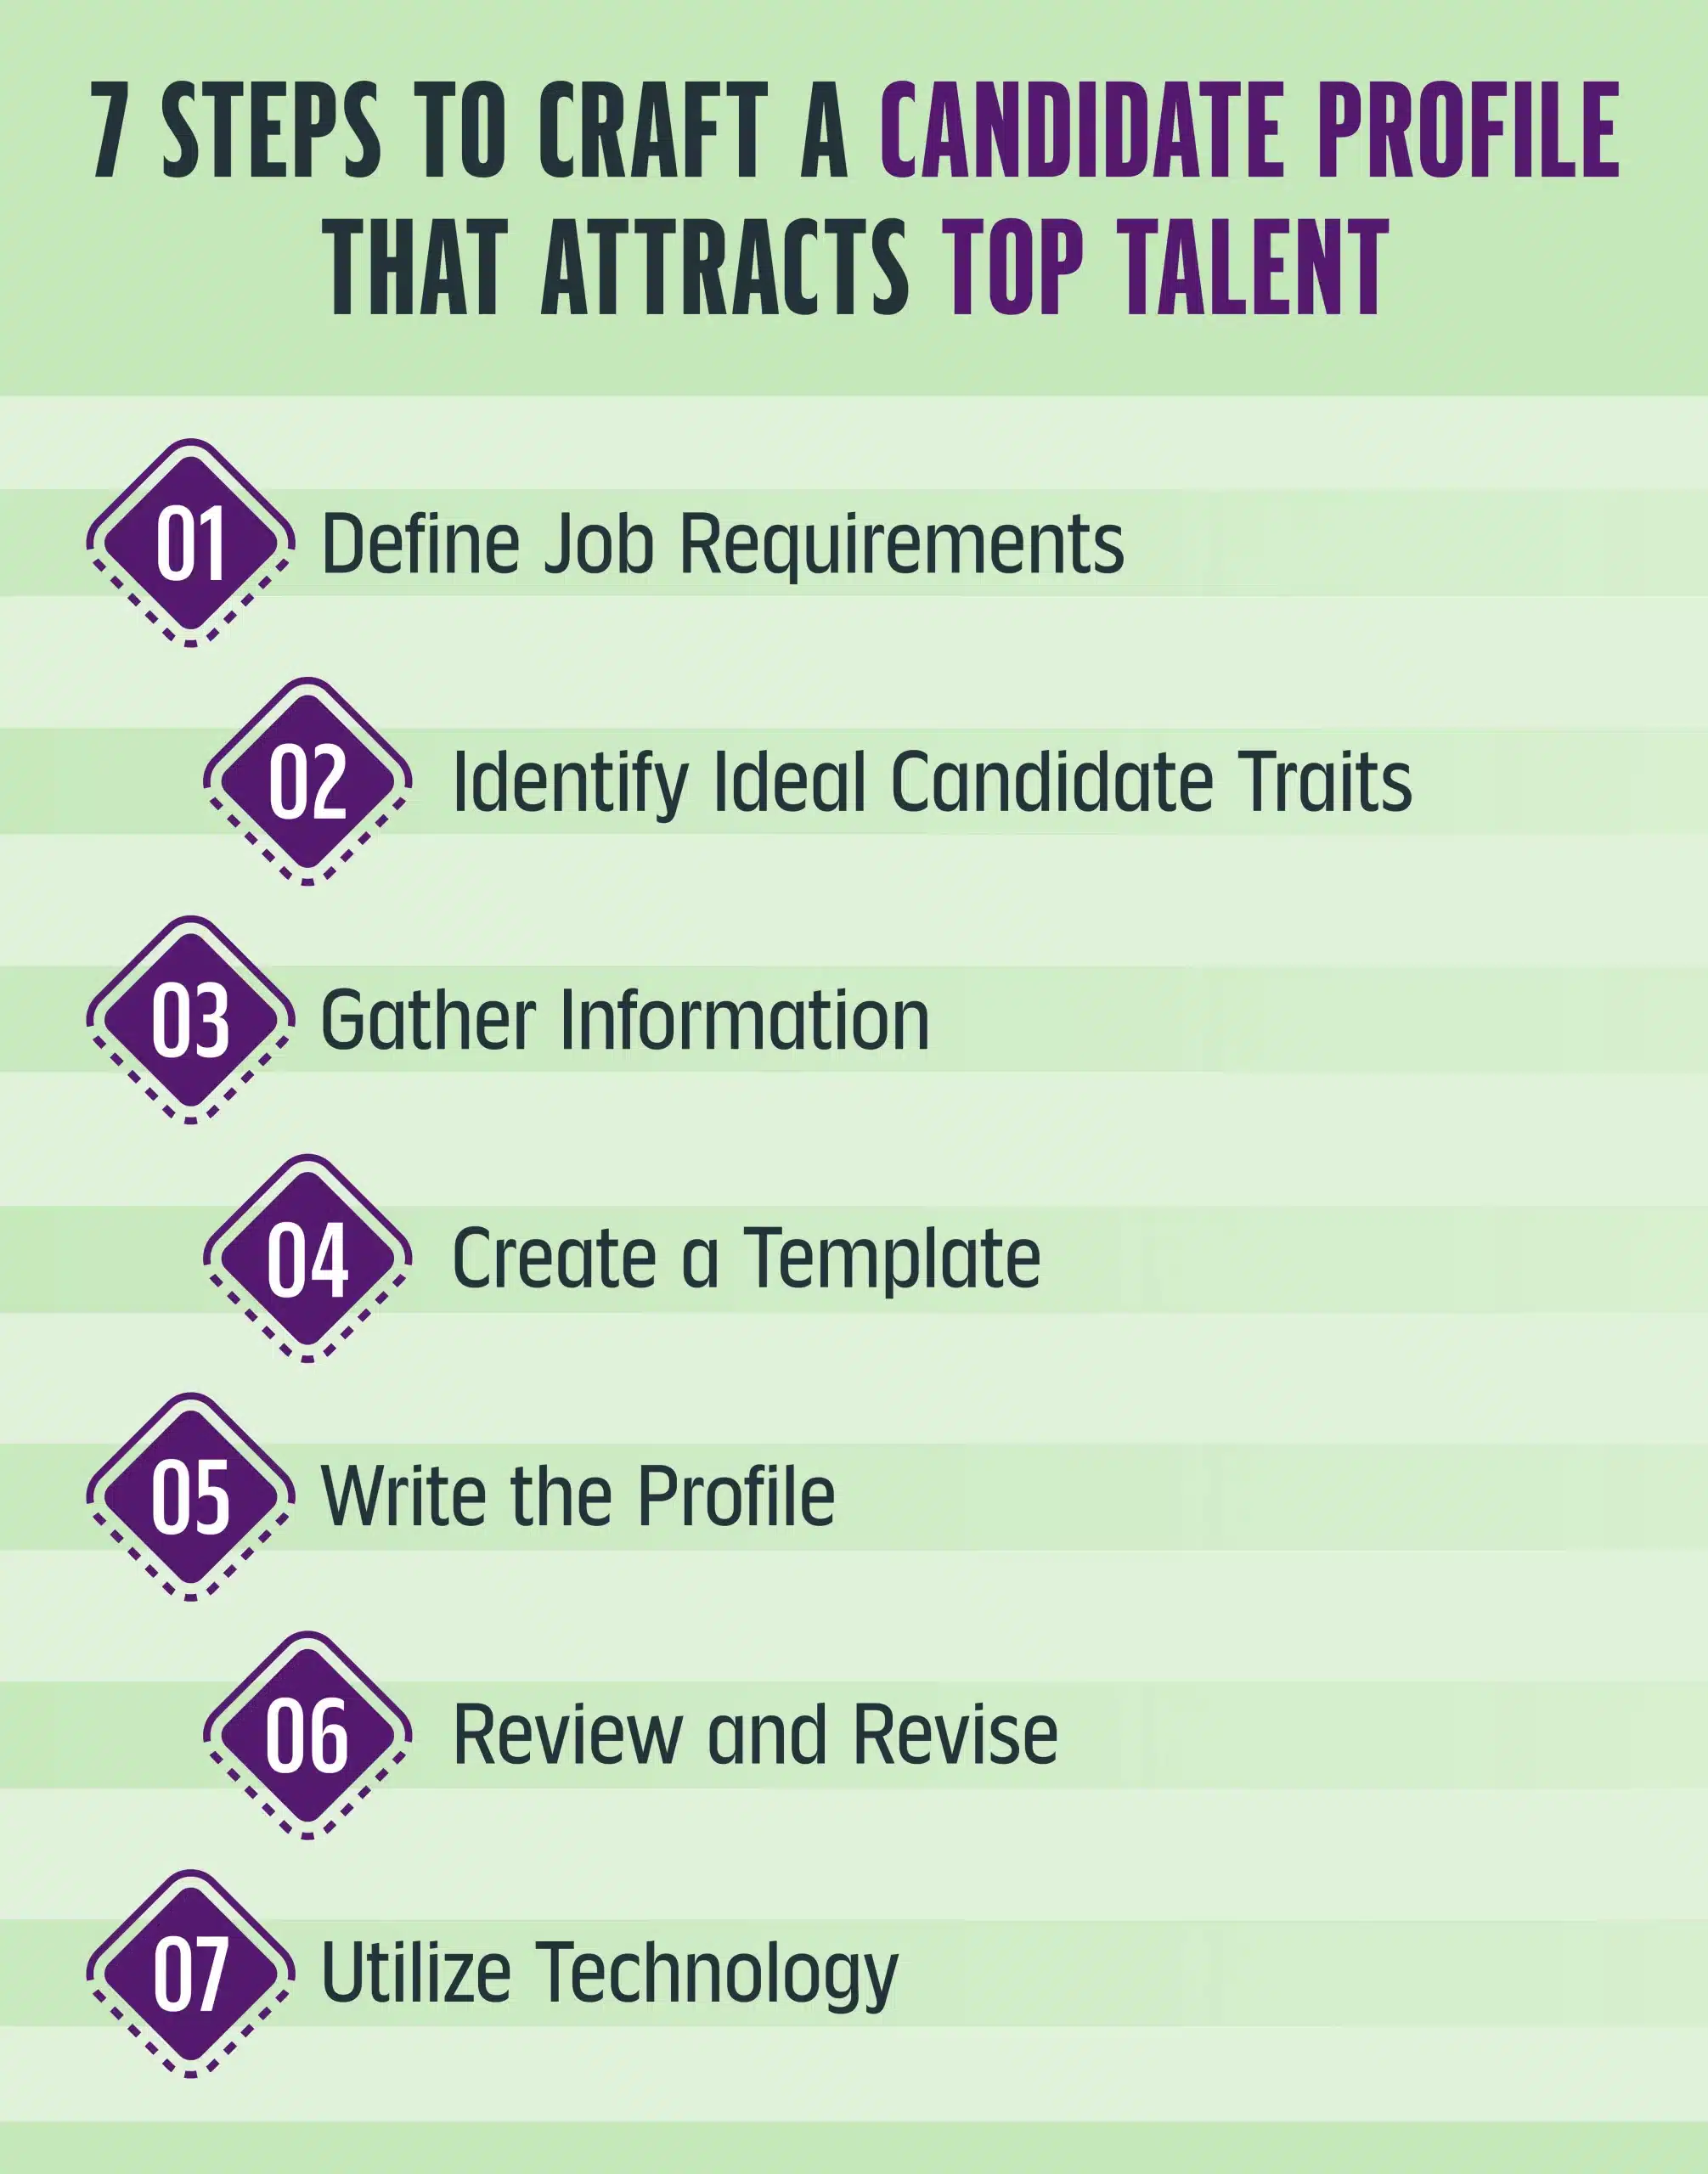 7 Steps to Craft a Candidate Profile That Attracts Top Talent